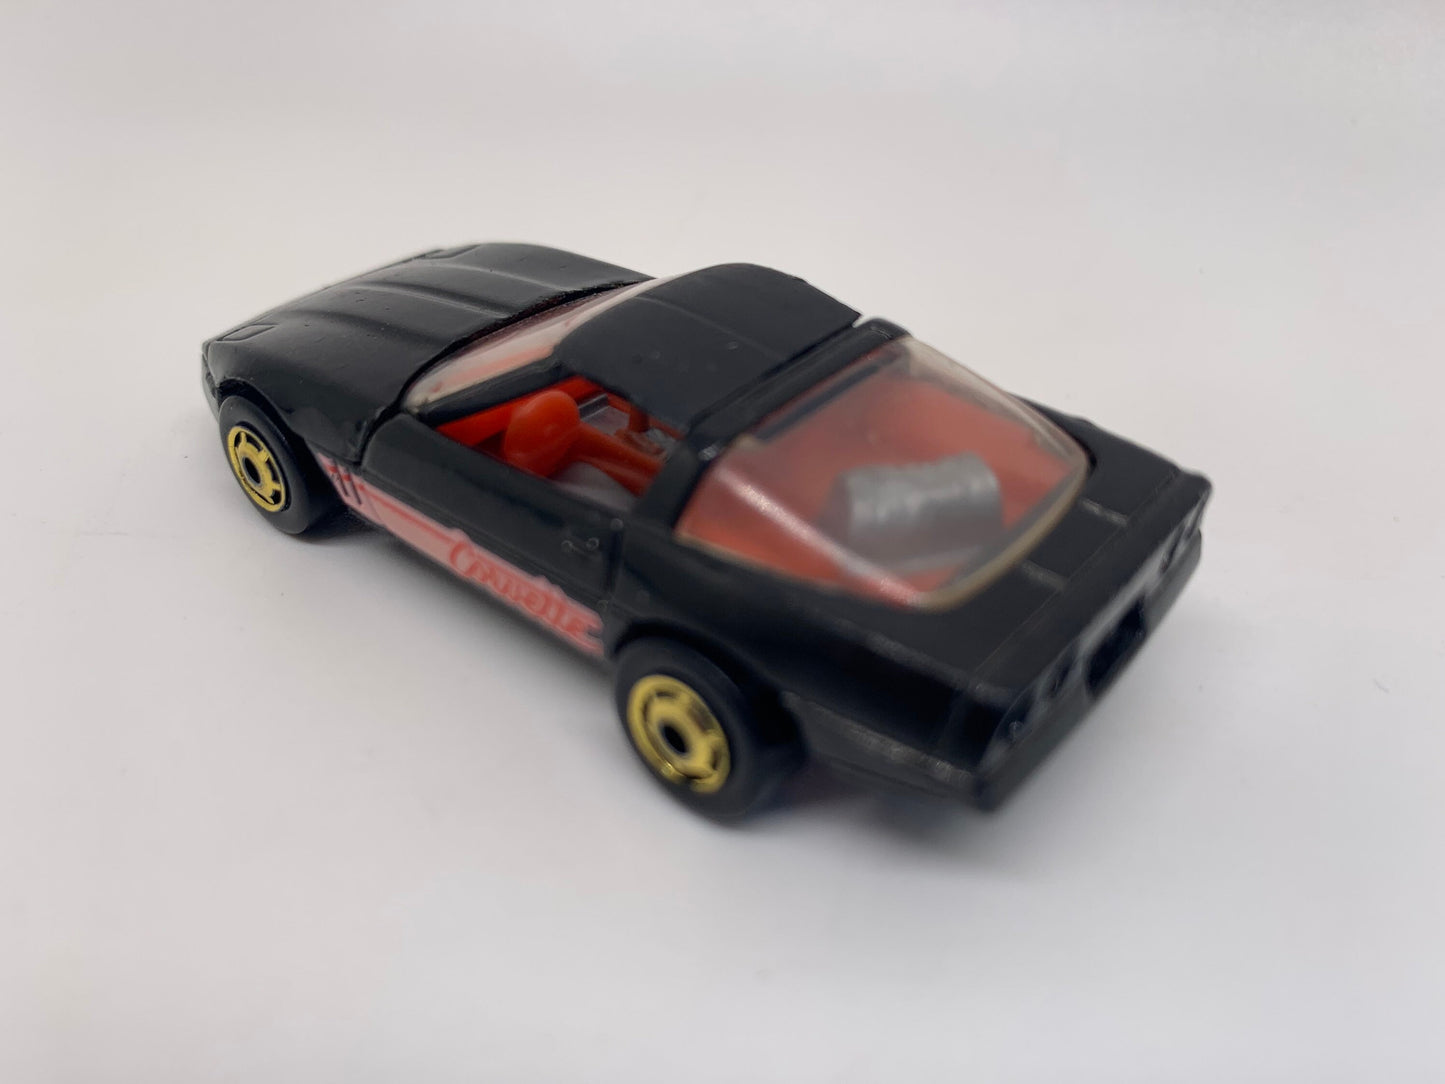 Hot Wheels '80's Corvette Black Hot Ones Perfect Birthday Gift Miniature Collectable Model Toy Car